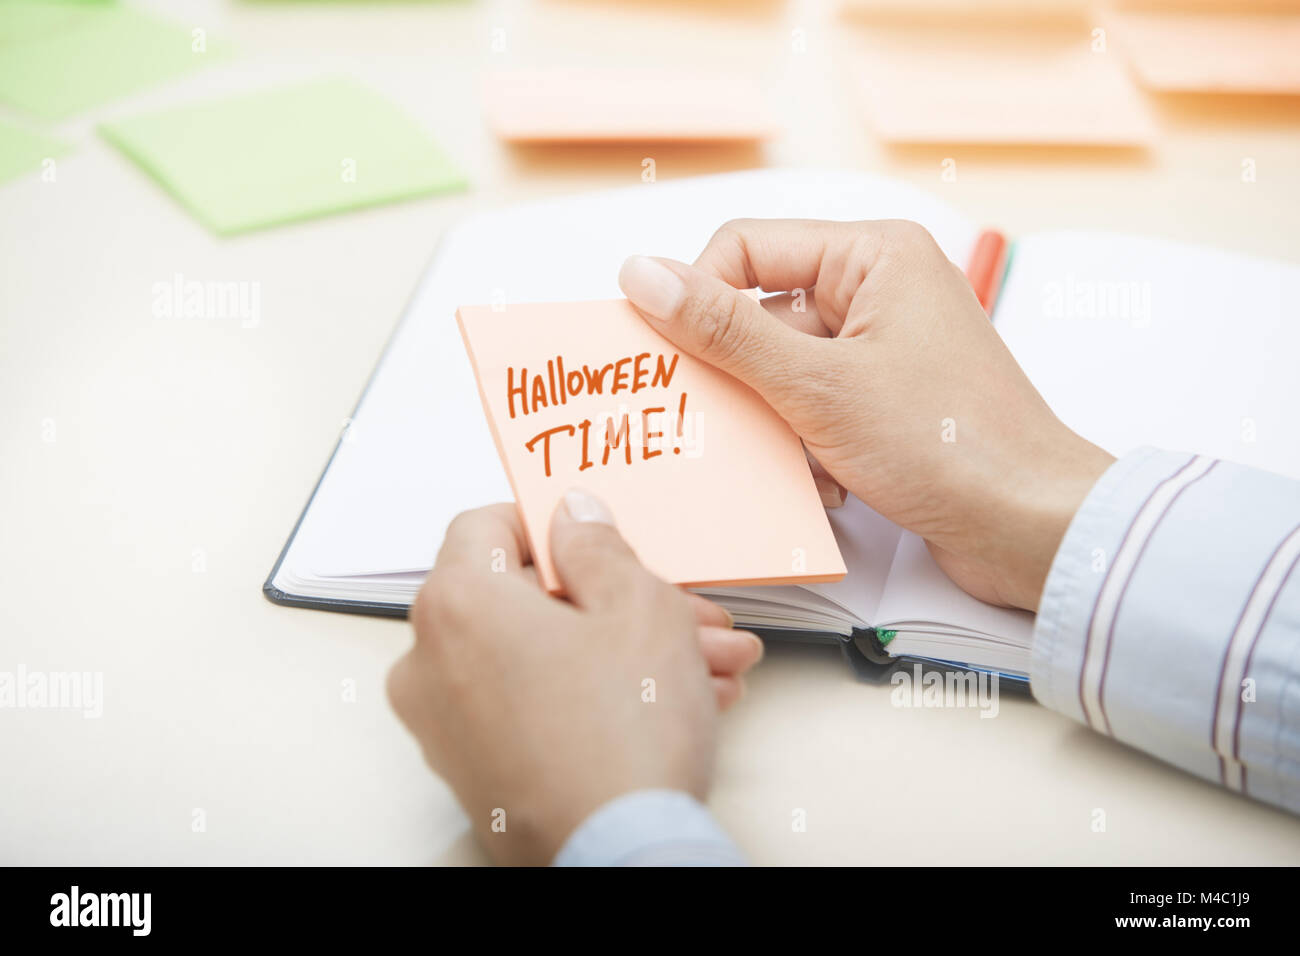 Halloween time text on adhesive note Stock Photo